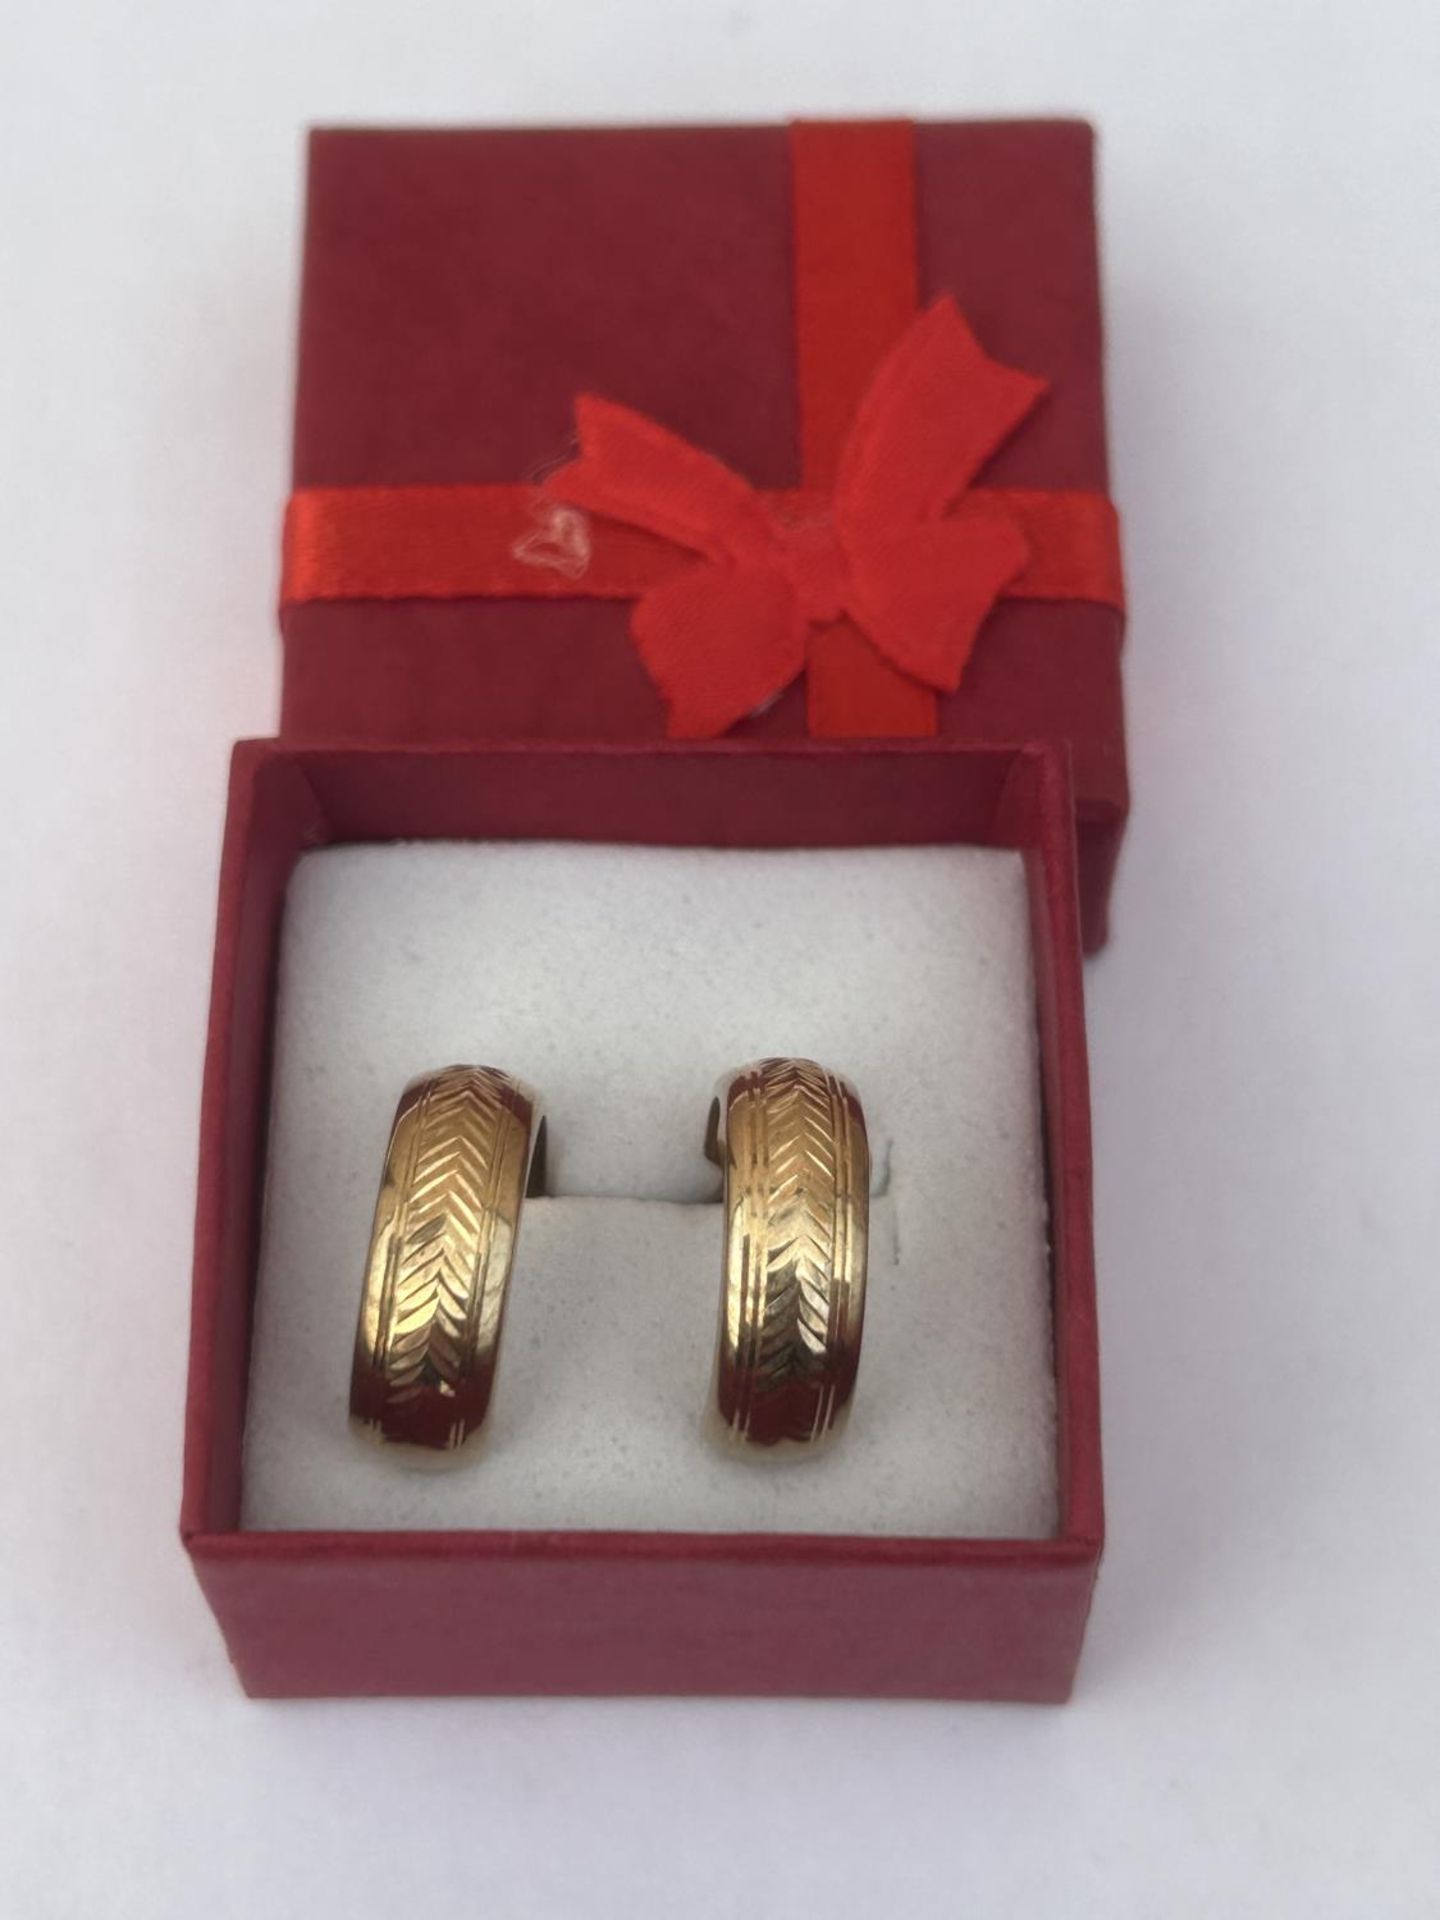 A PAIR OF 9CT GOLD HALF MOON EARRINGS COMPLETE WITH GOLD BUTTERFLY BACKS AND PRESENTATION BOX,